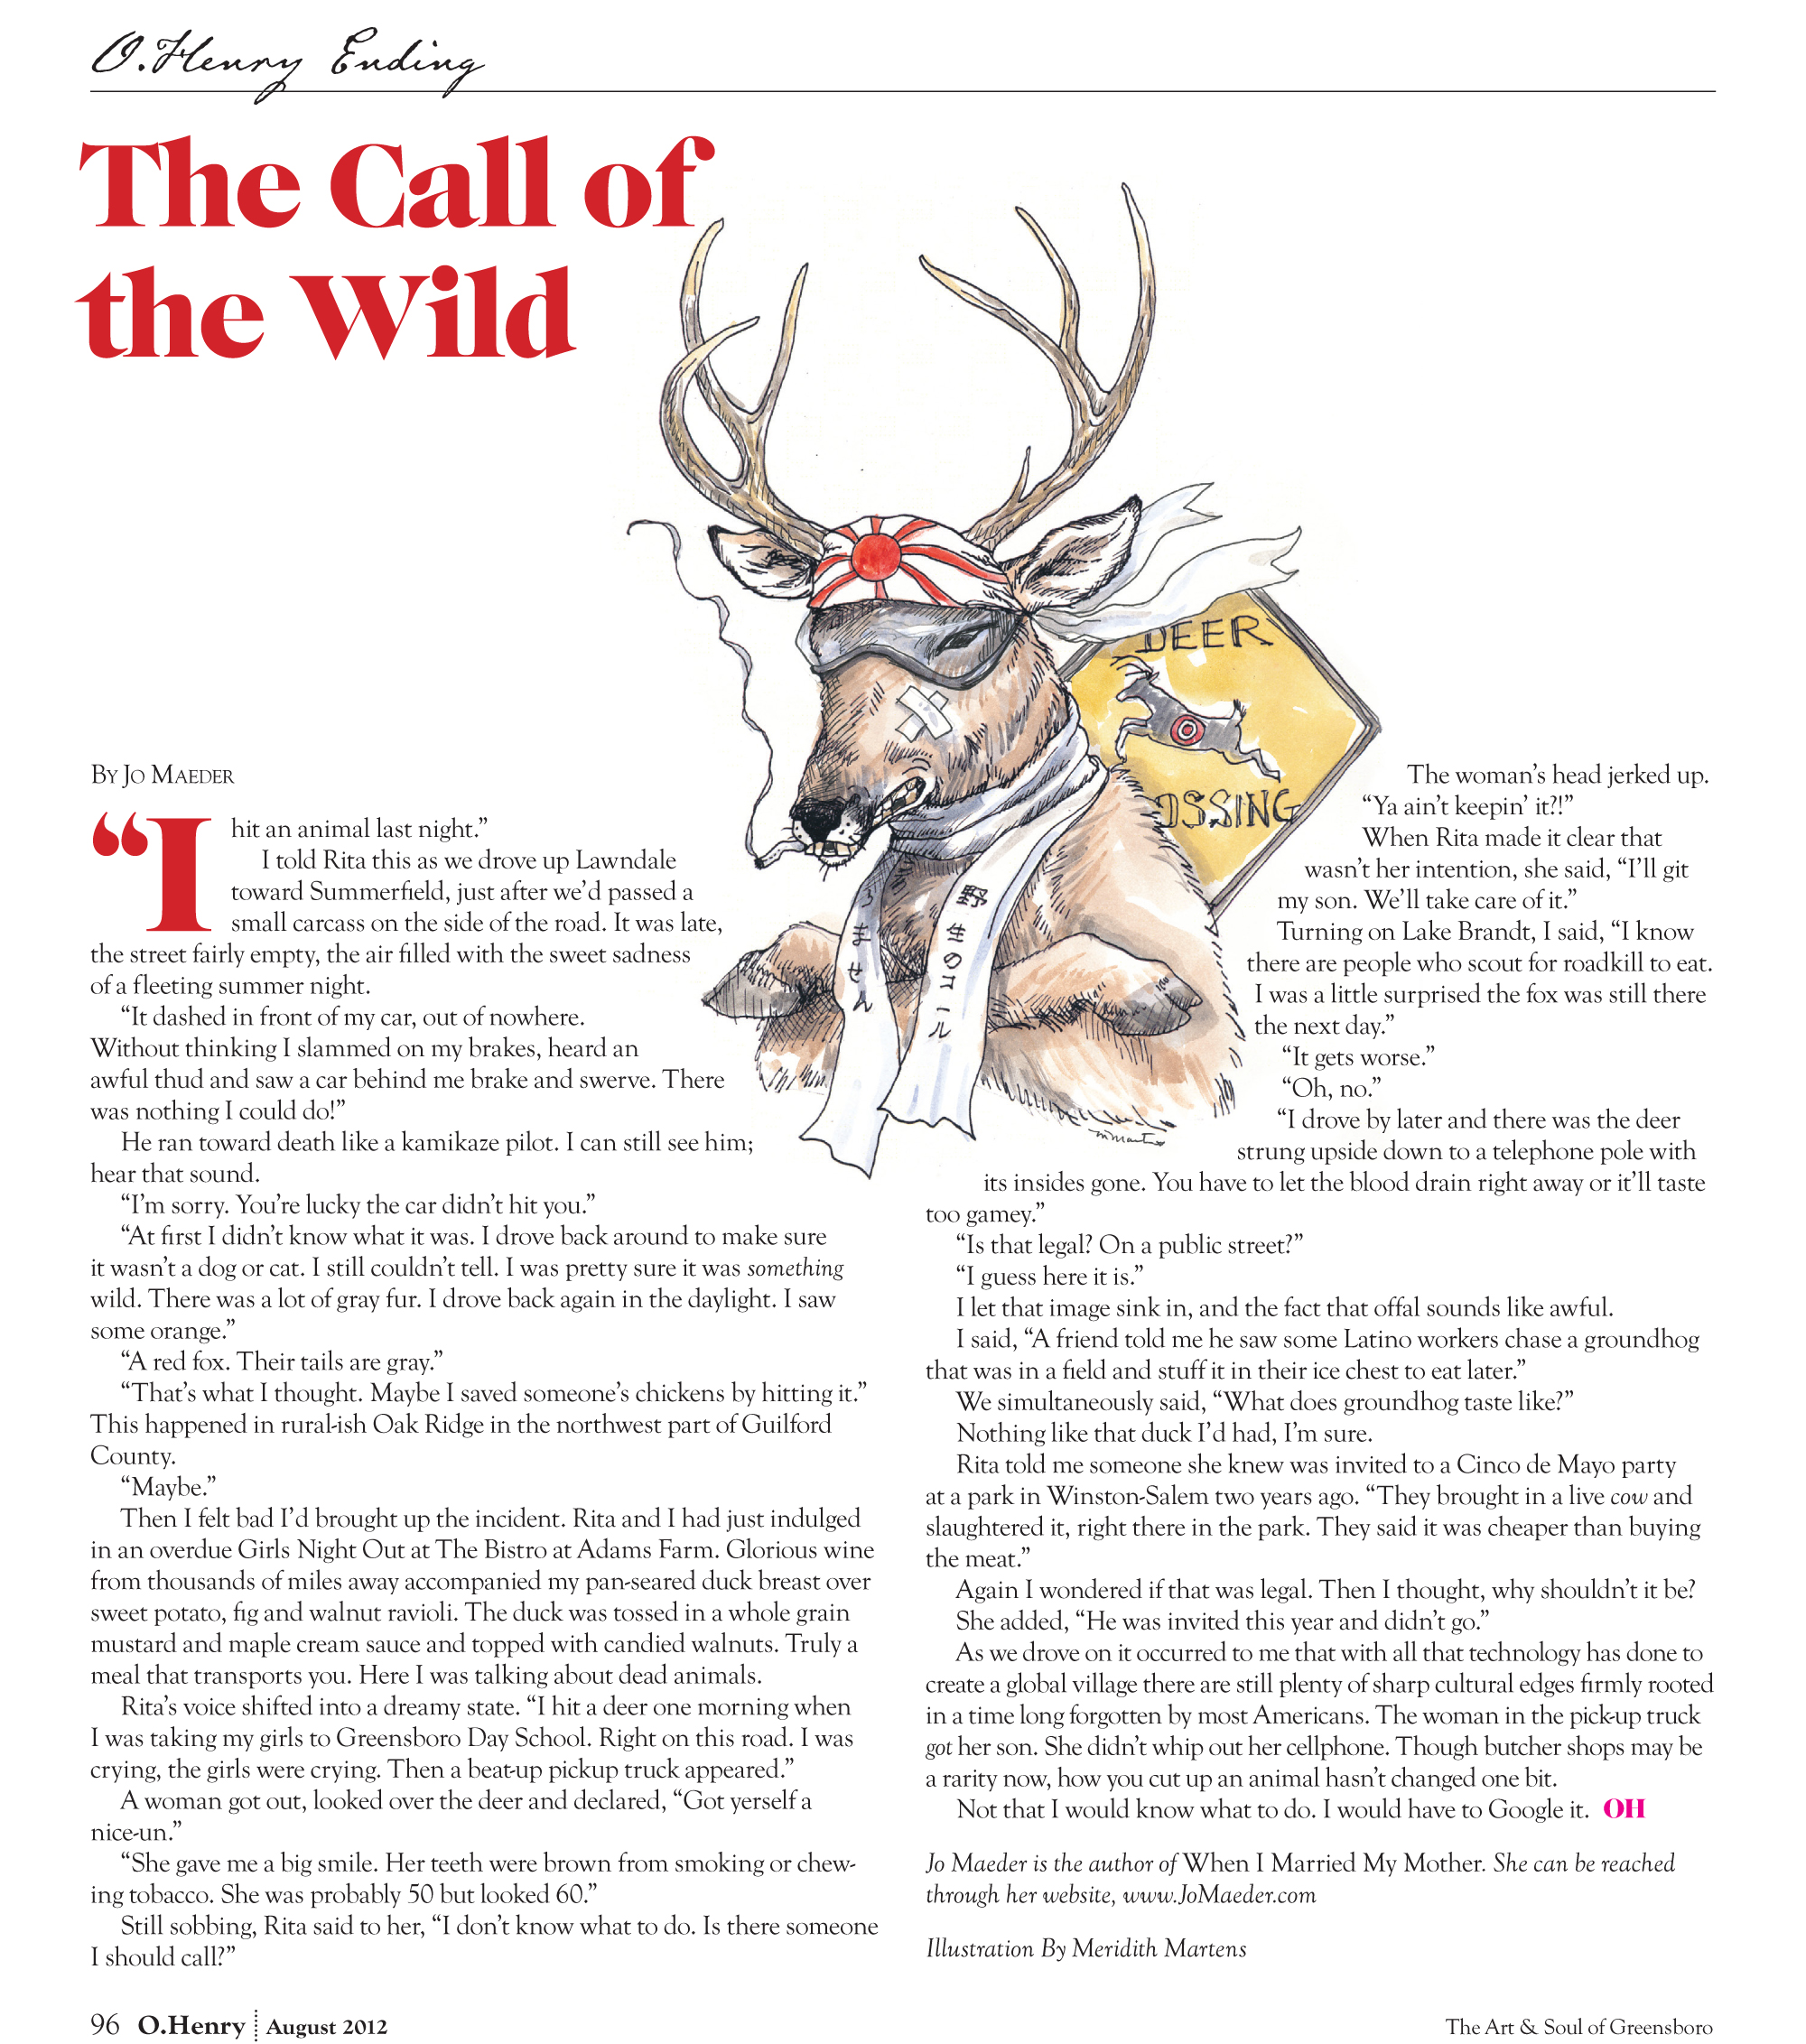 The call of the wild essay